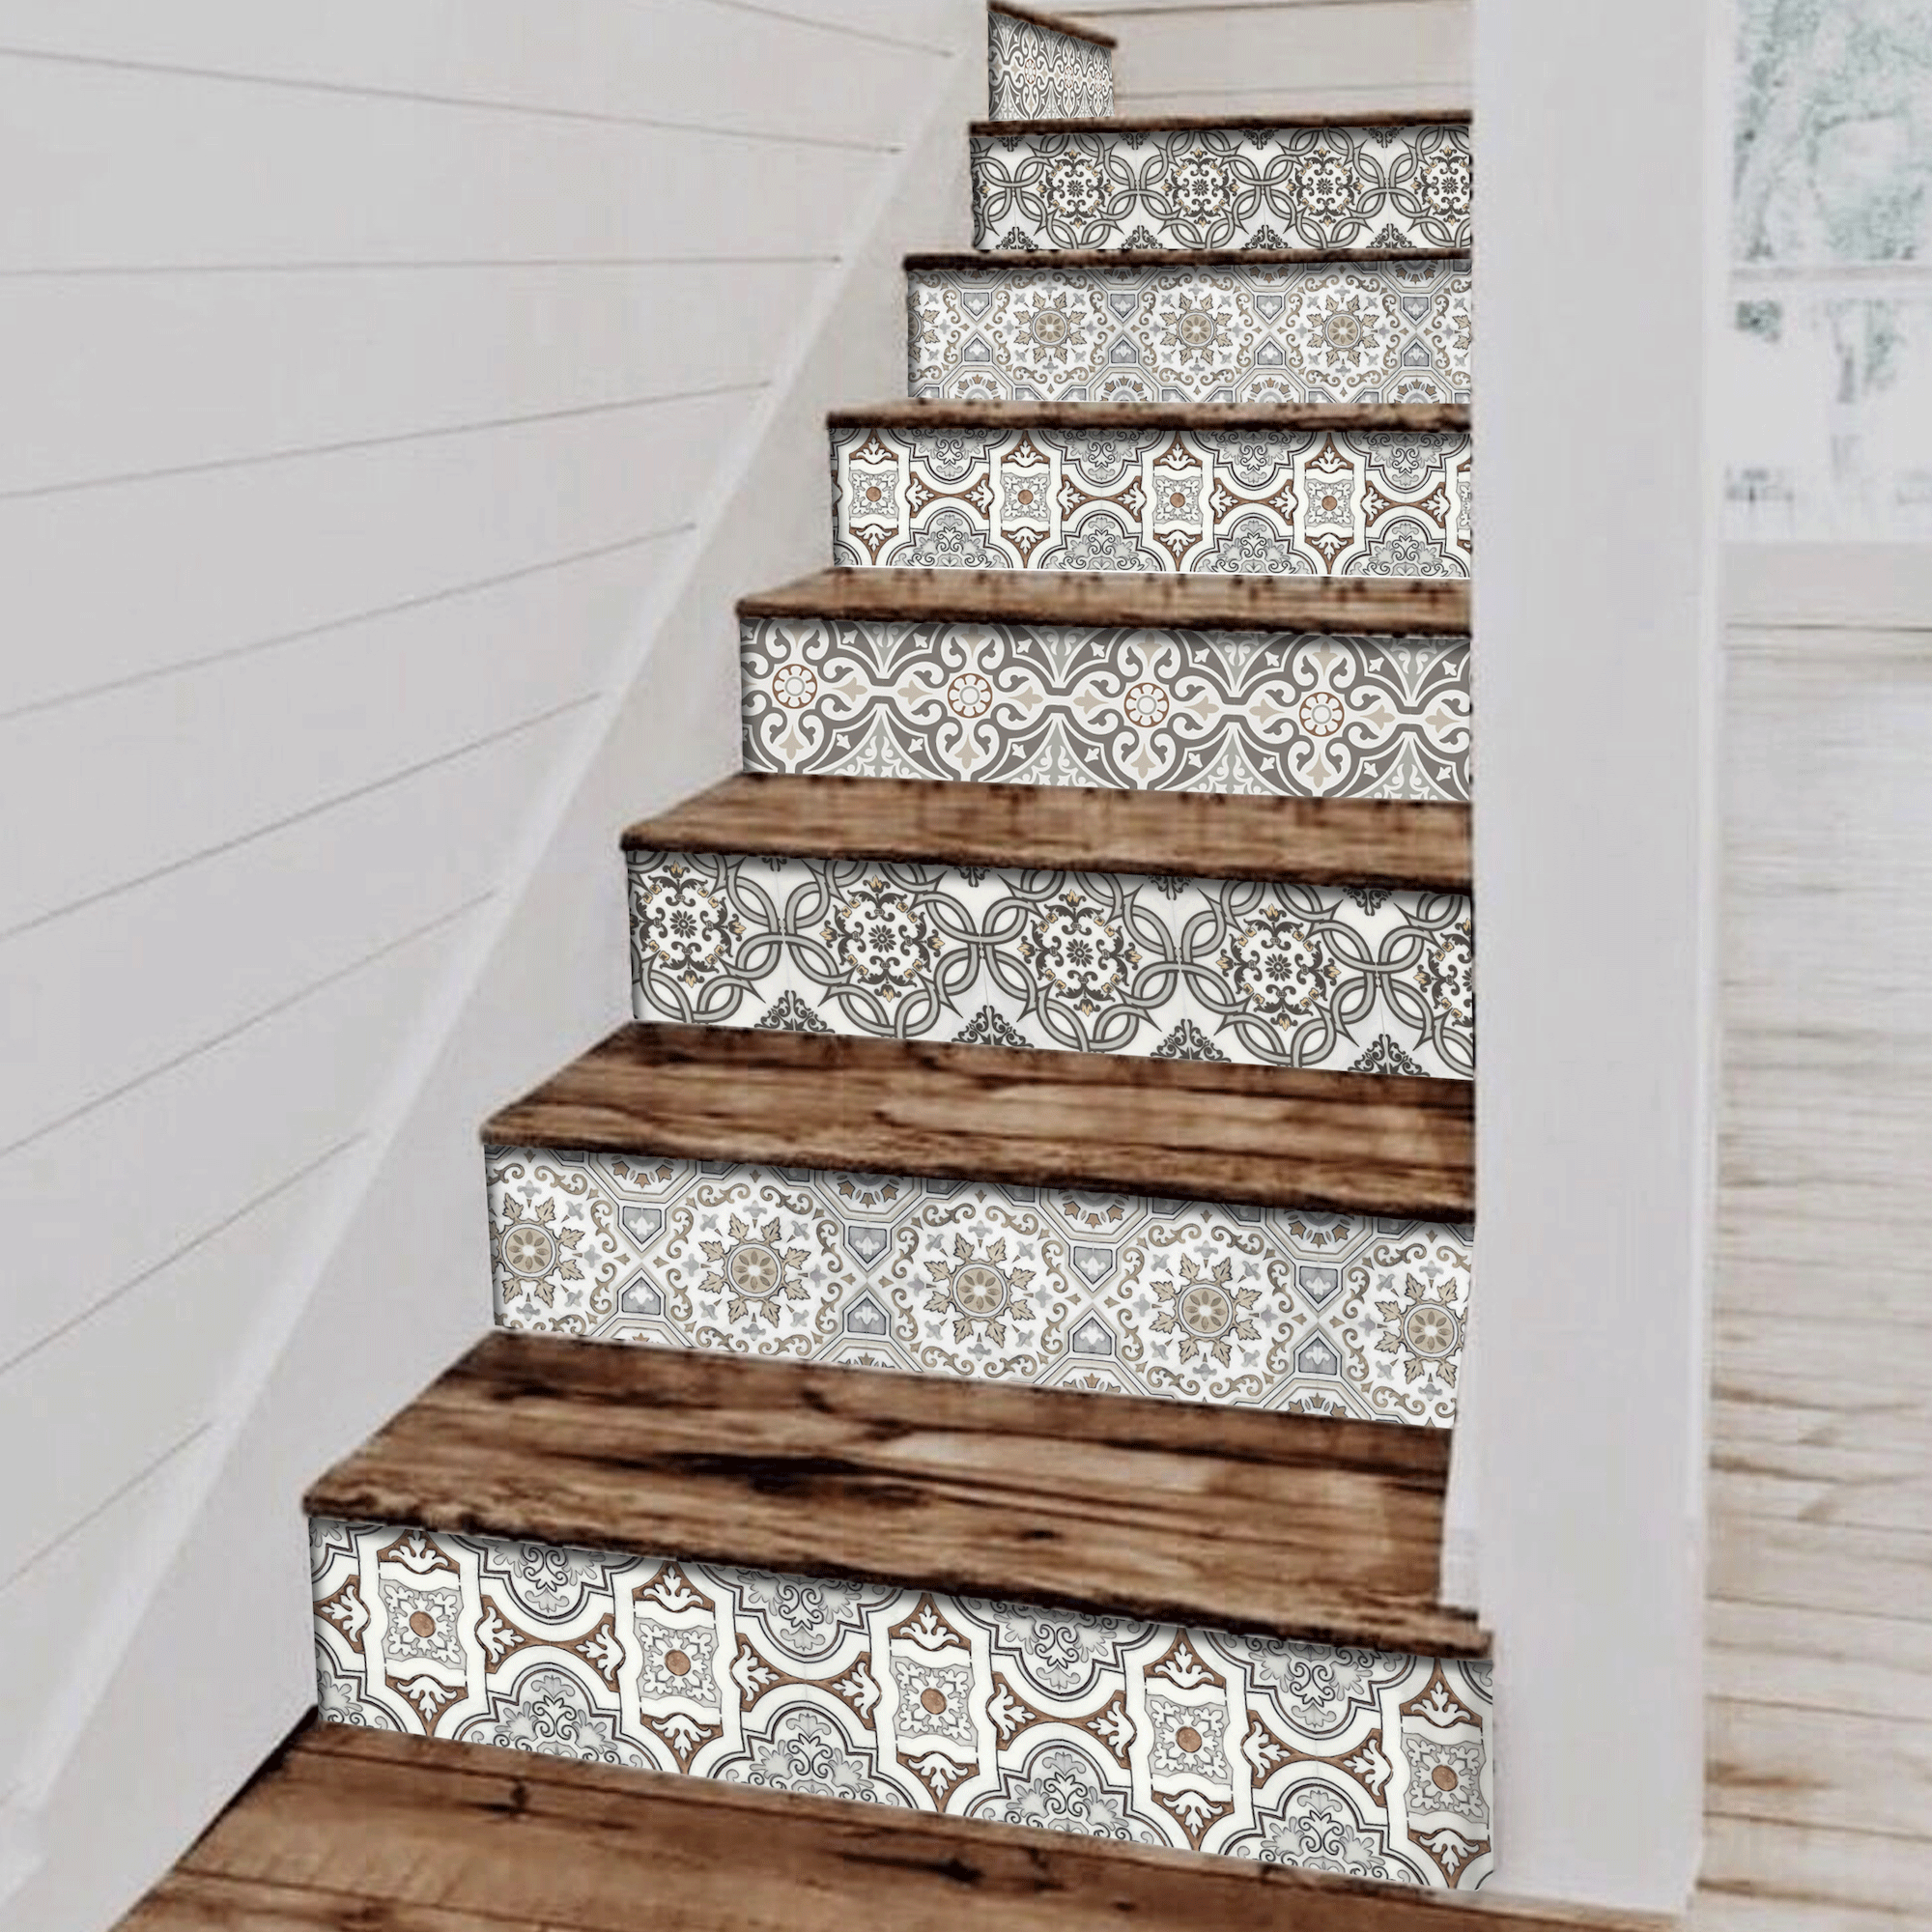 Black and white tiles on wooden staircase